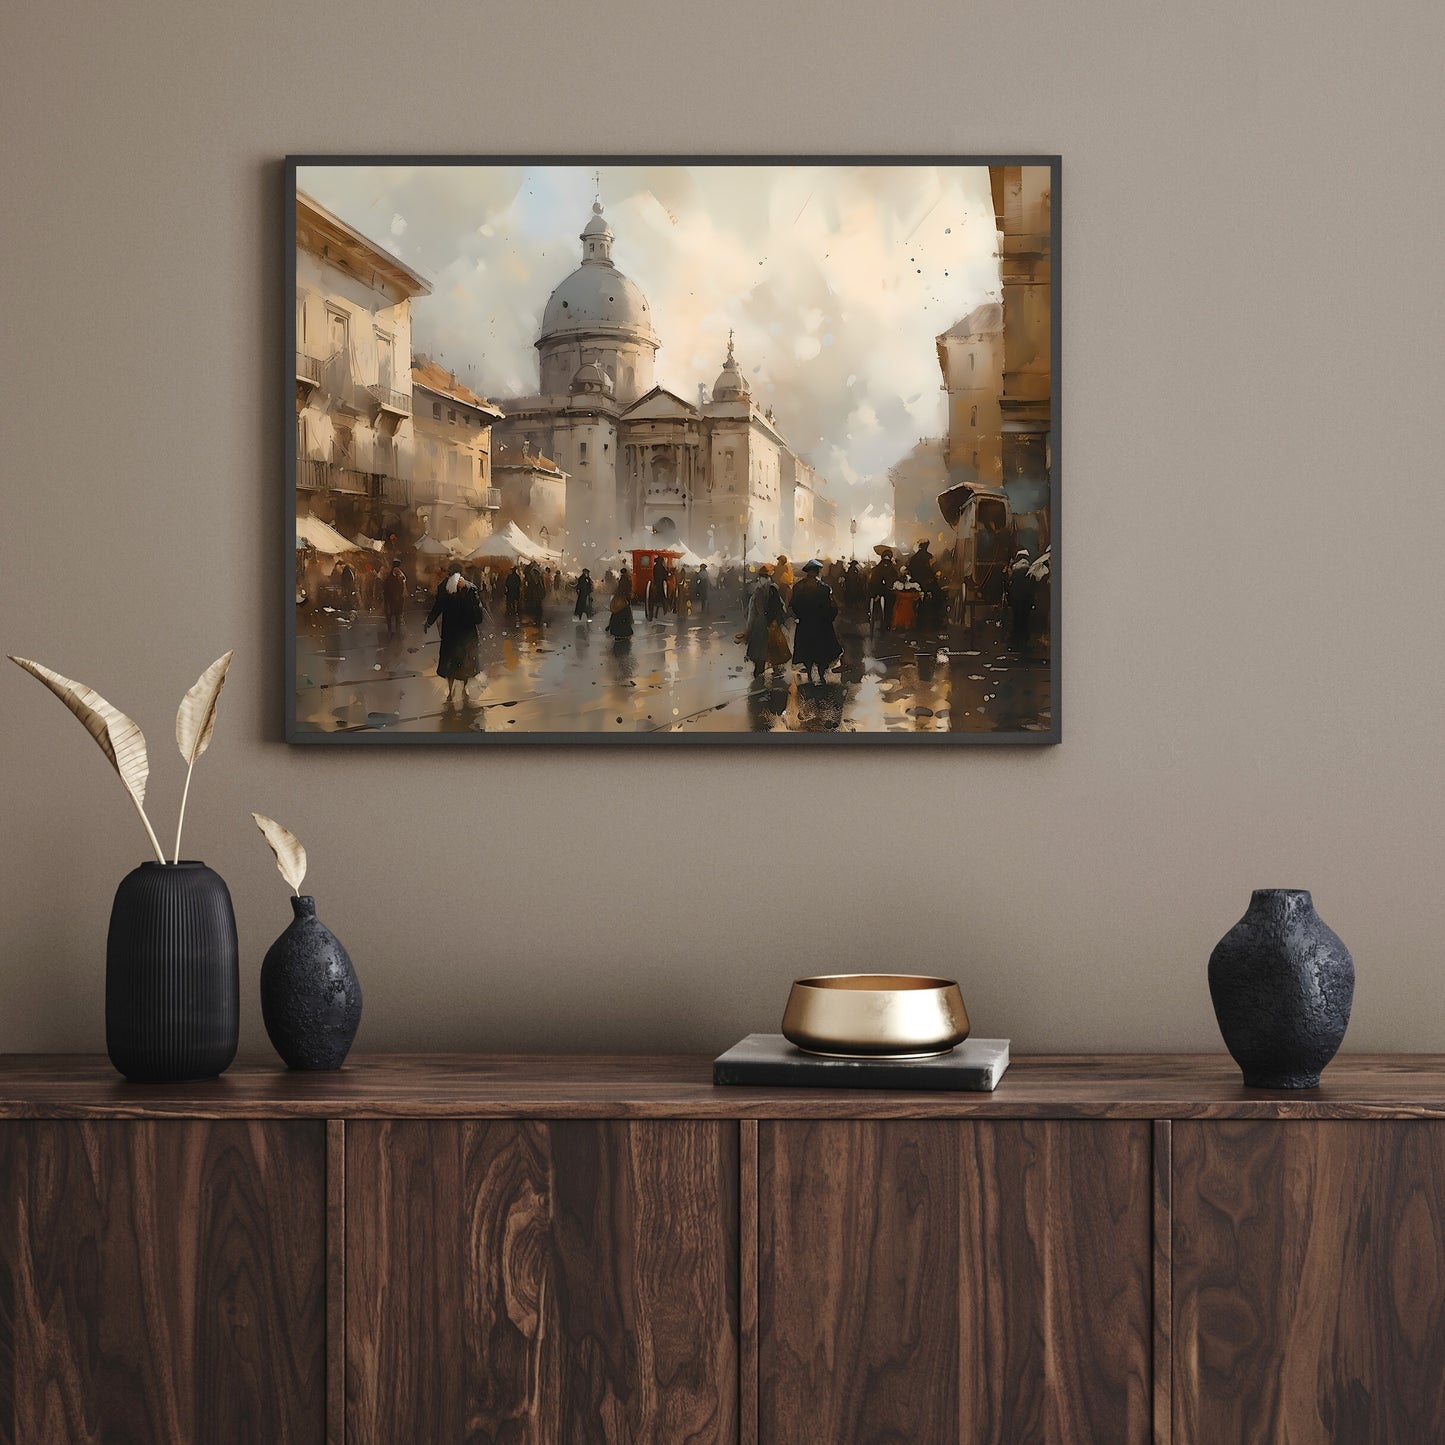 Rome 19th Century Street View Vintage Paper Poster Prints Wall Art Cityscape Impressionistic Painting Nostalgia Artwork Above Couch Decor